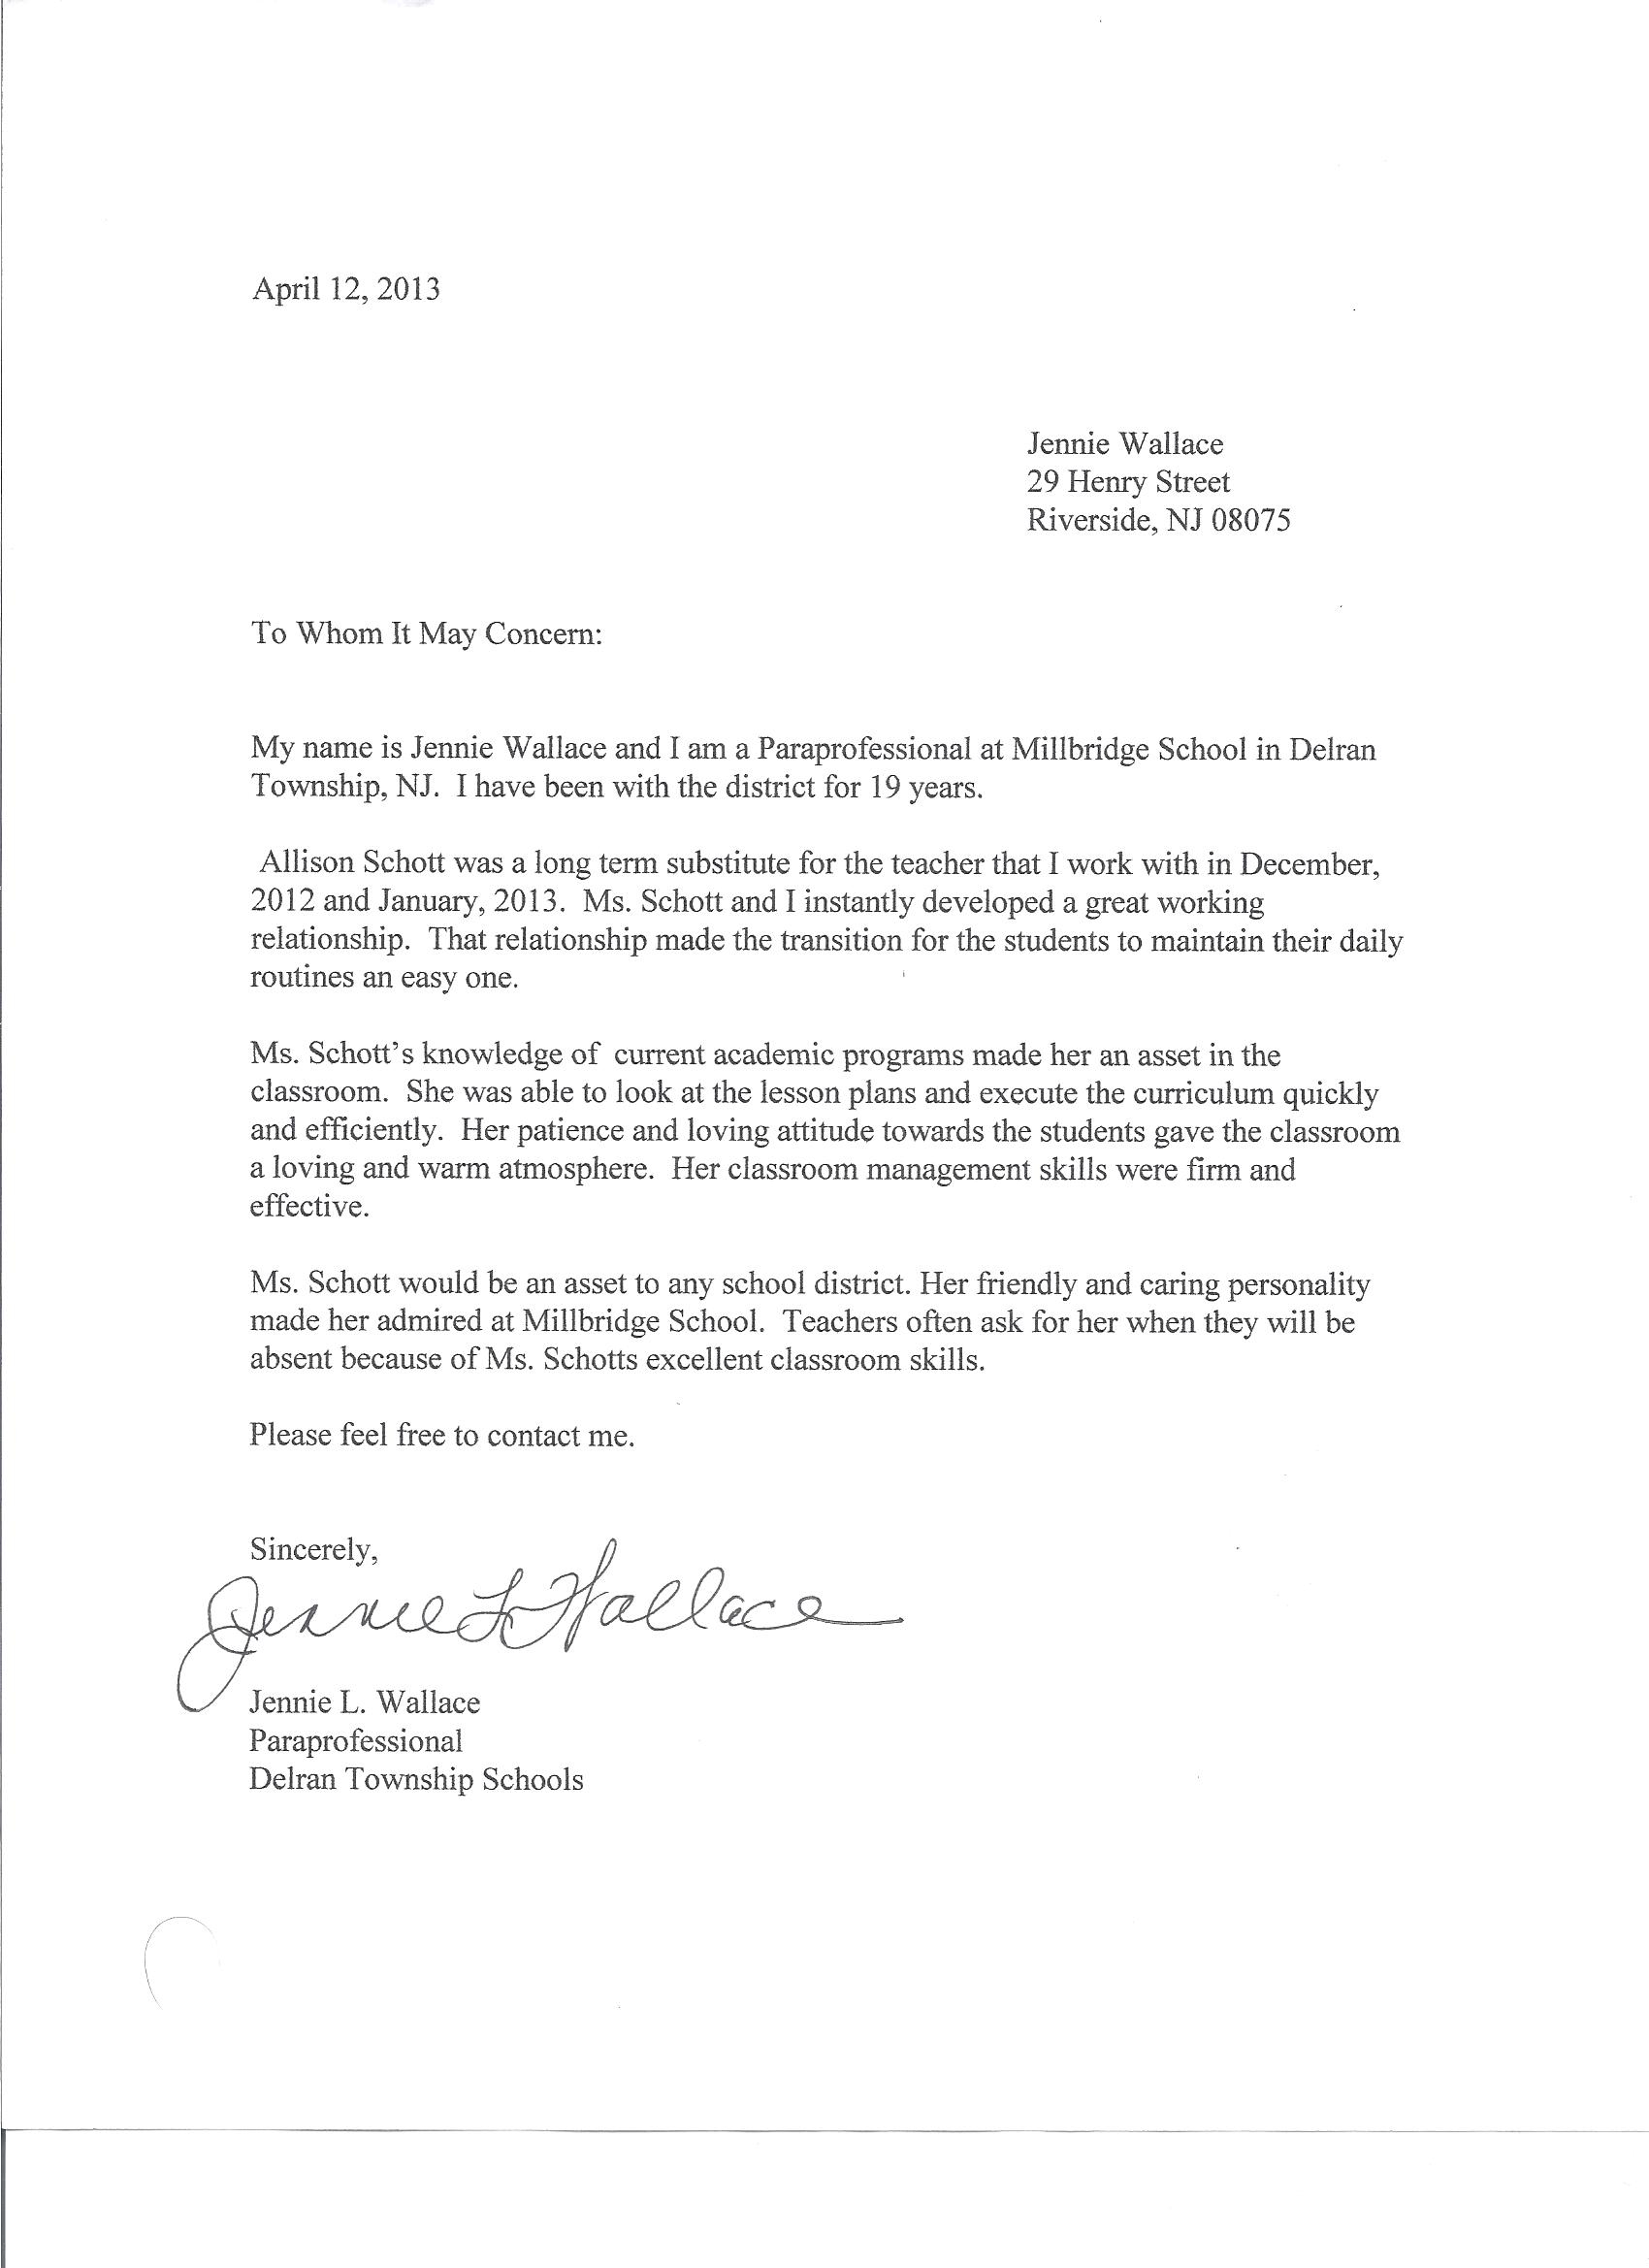 Letter Of Recommendation For A Paraprofessional Debandje throughout dimensions 1700 X 2338